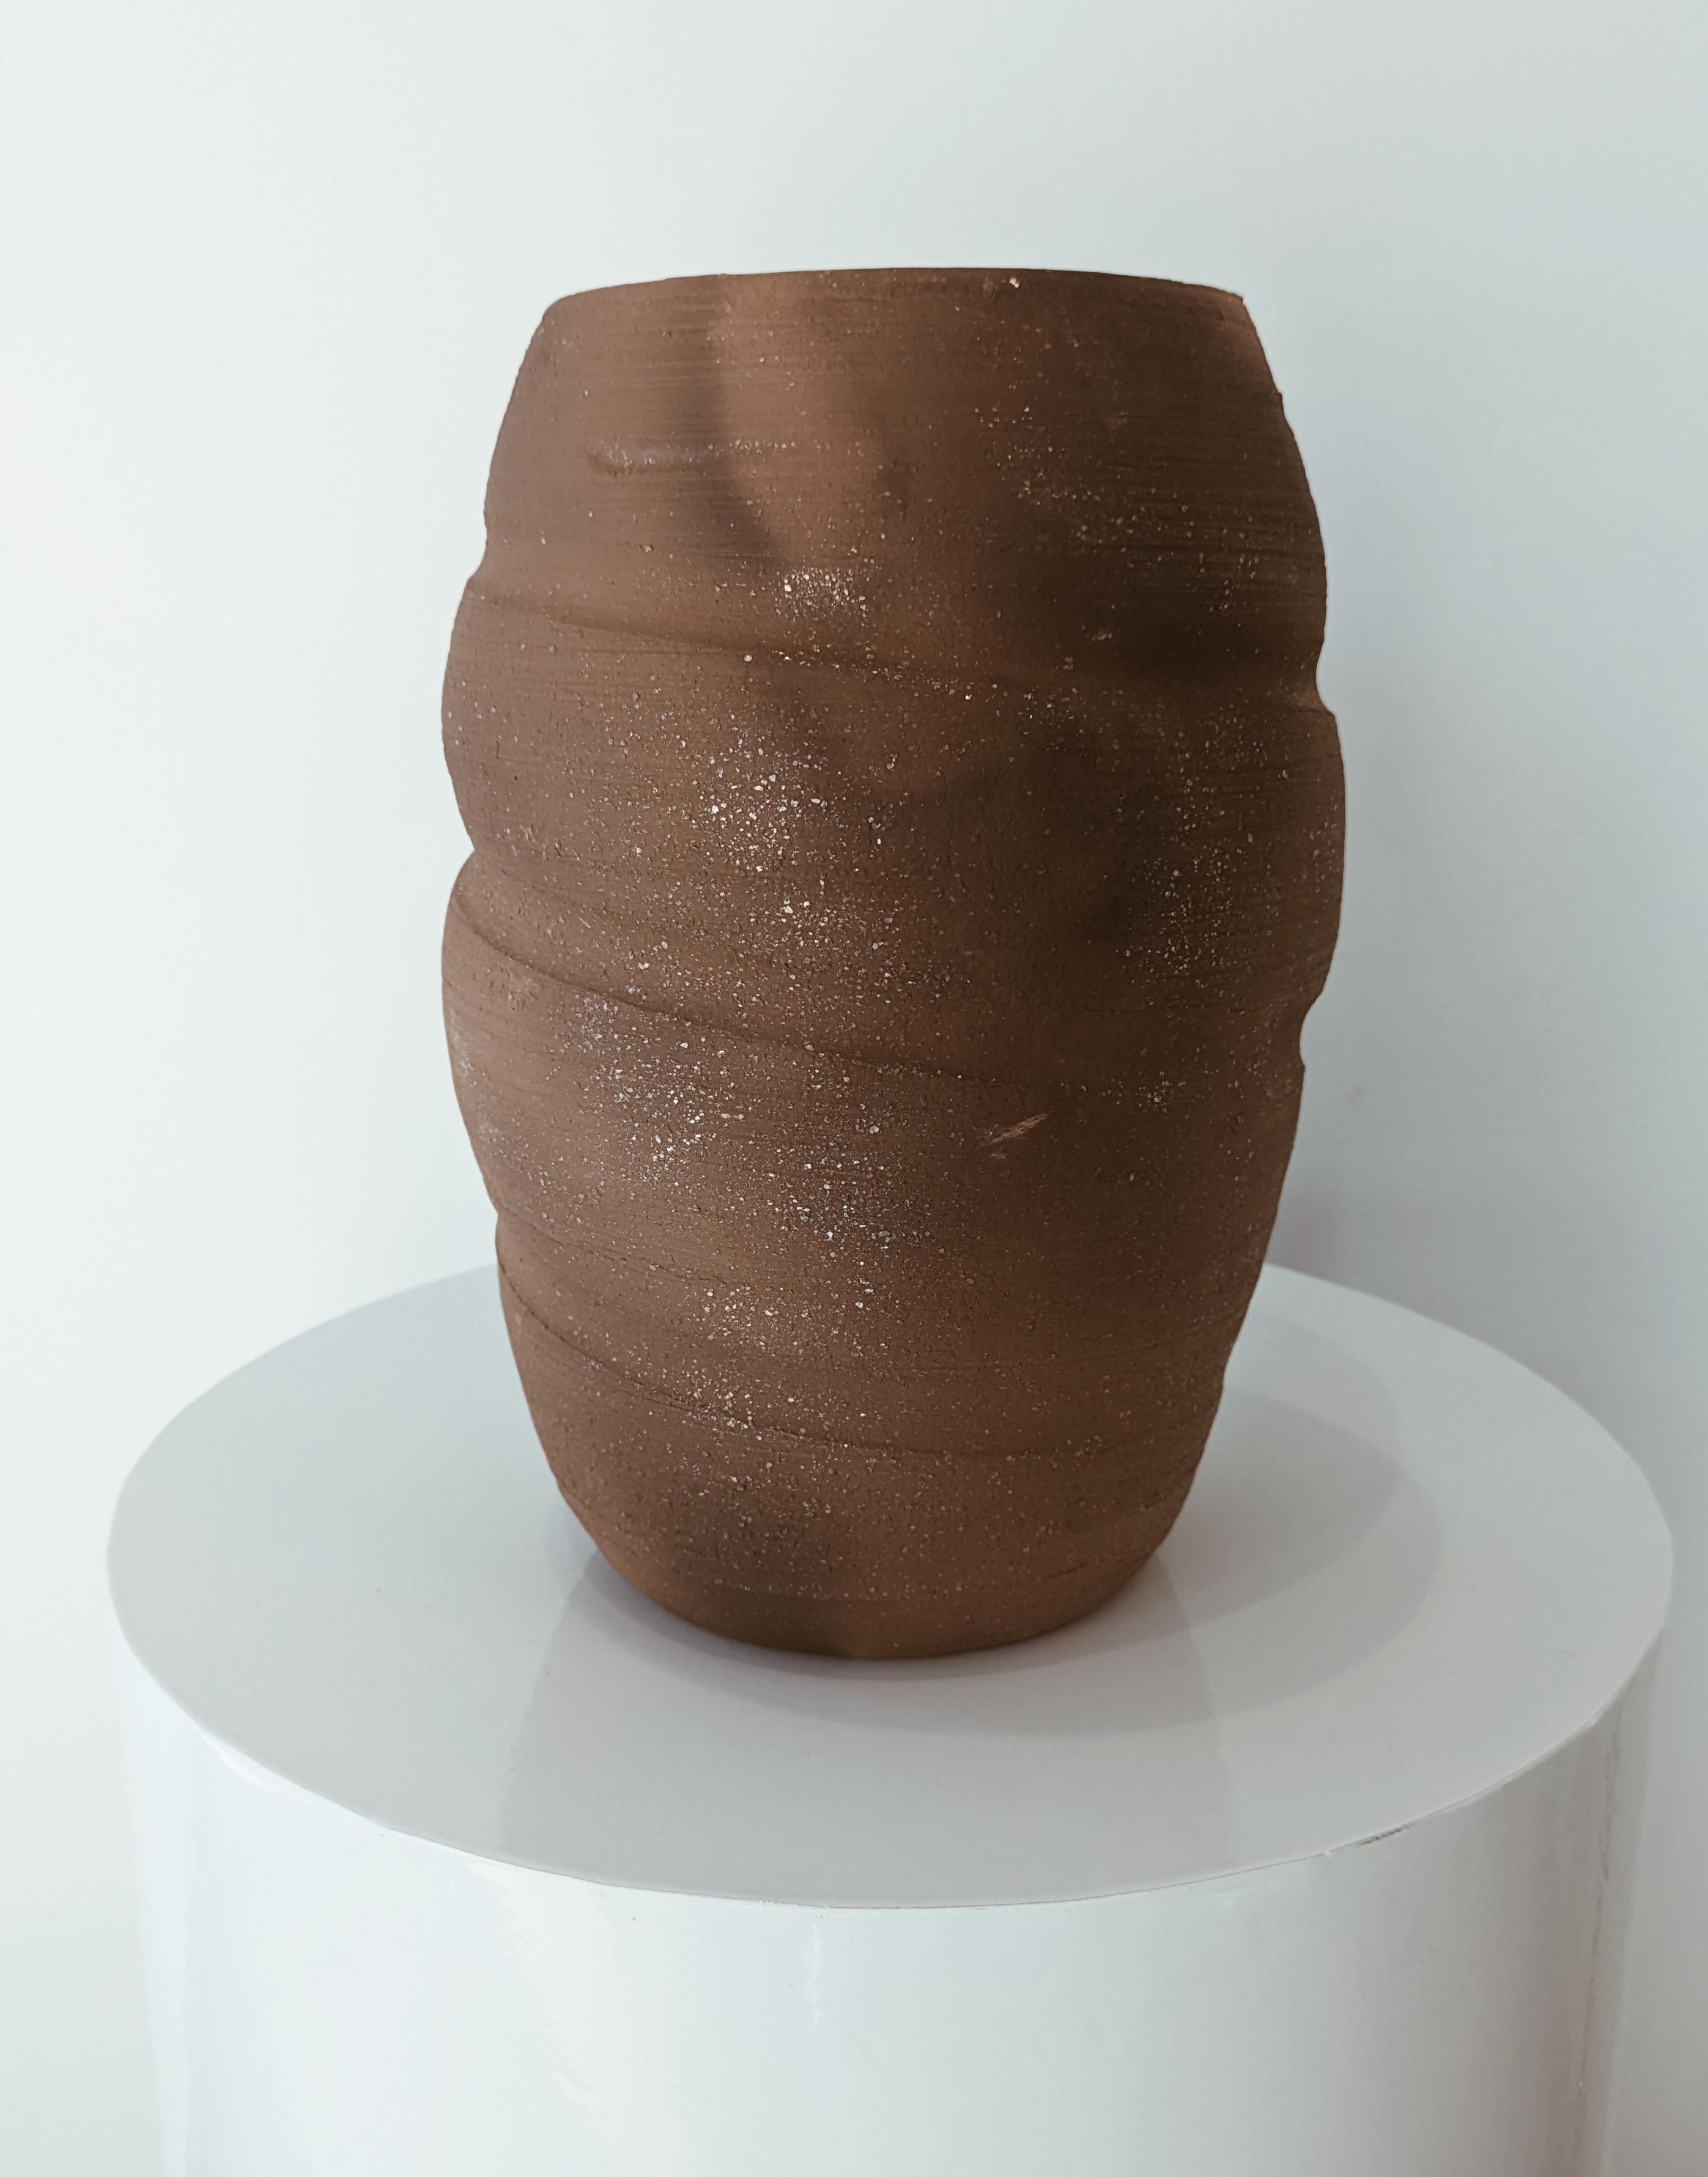 Inspired by the ancient art form of firing ceramics in a dirt pit, Erin Hupp’s latest collection of pit-fired ceramics is a once in a decade (or lifetime) body of work.

Each piece is hand thrown with a unique micaceous clay that can withstand the